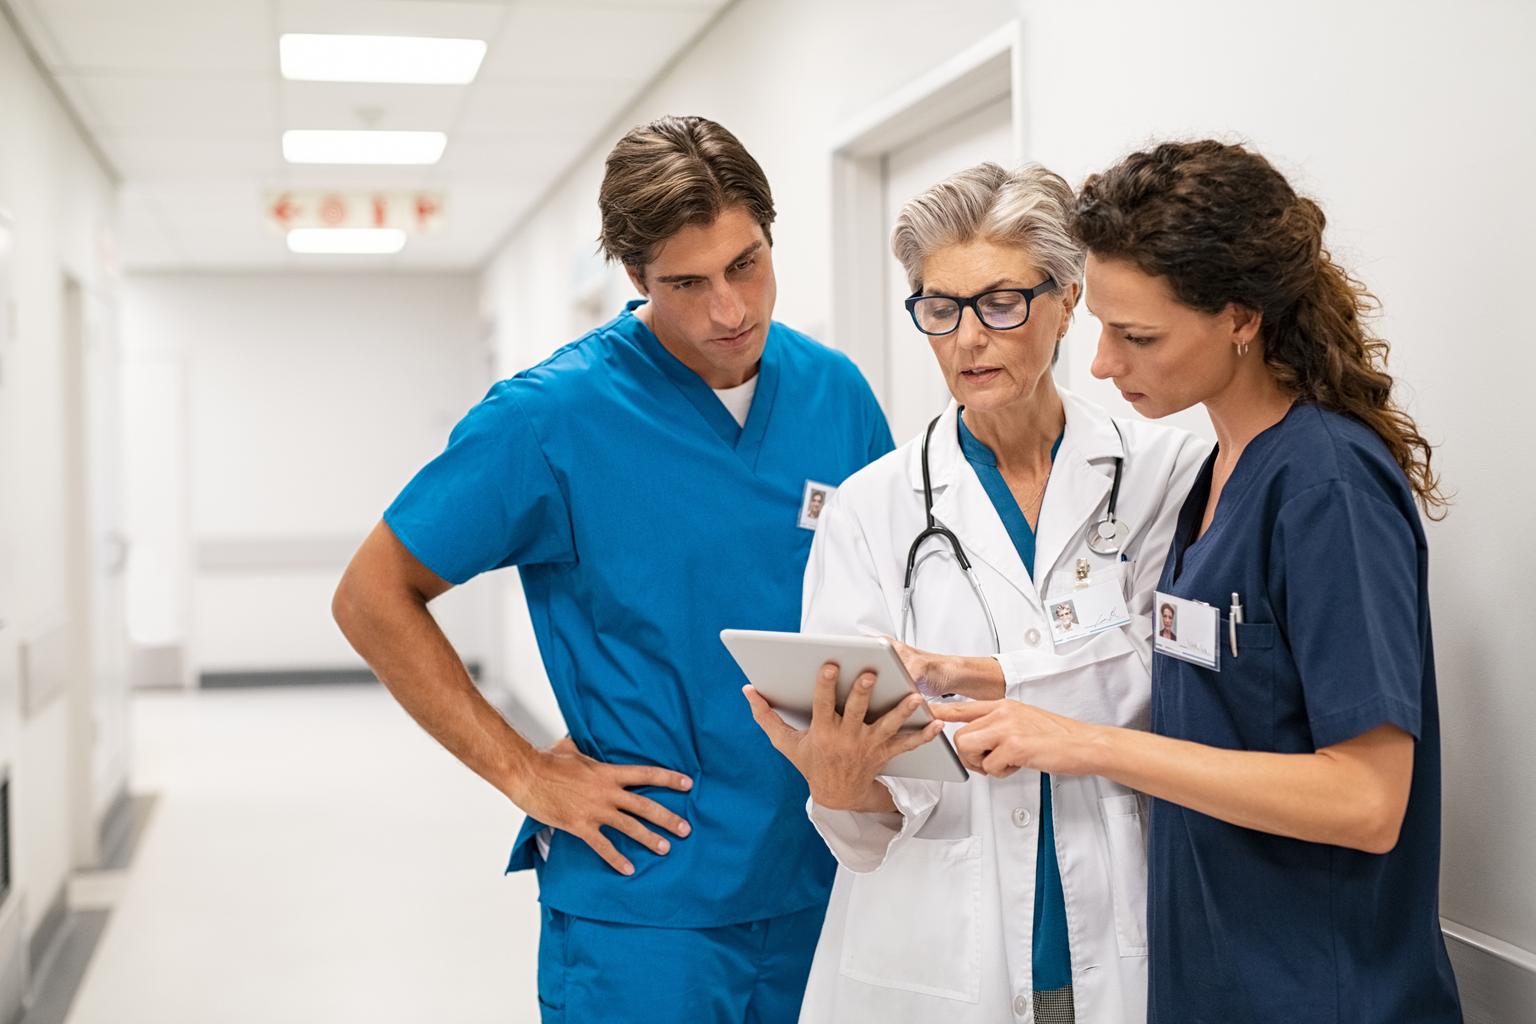  A doctor and nurse discussing a patient's case in a hospital setting